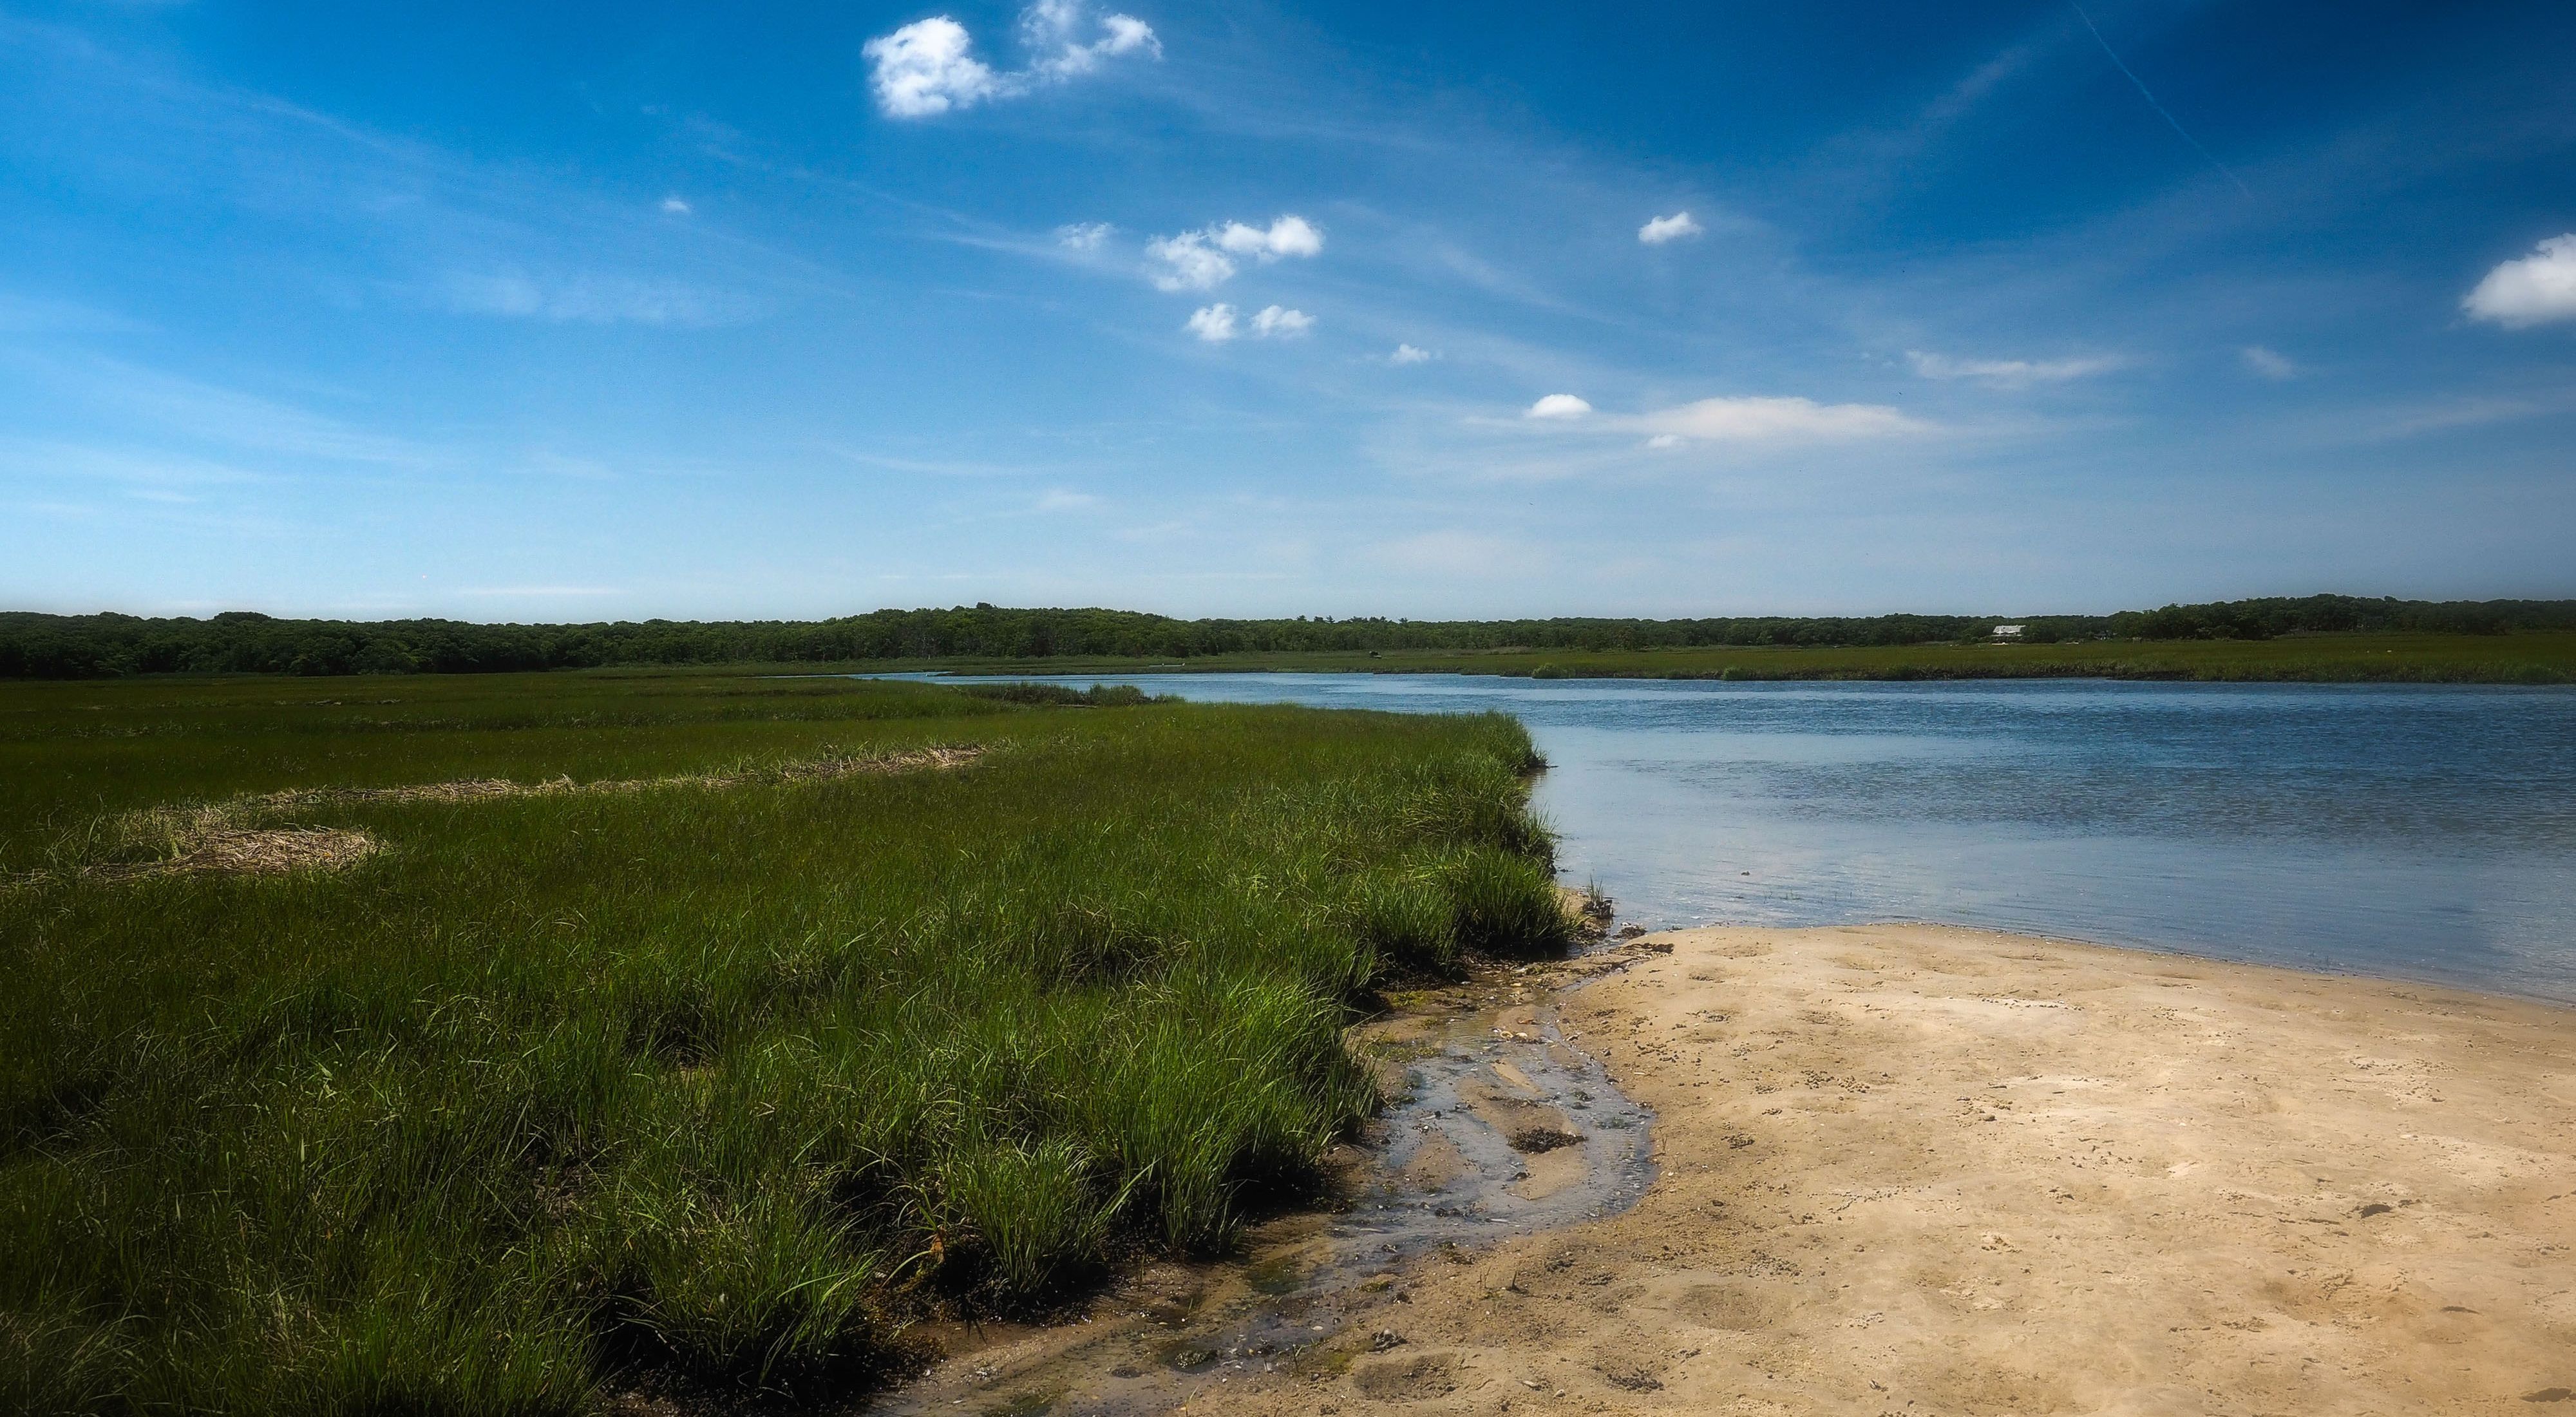 Looking out over shoreline with marsh habitat to the left and ocean view to the right and background. 